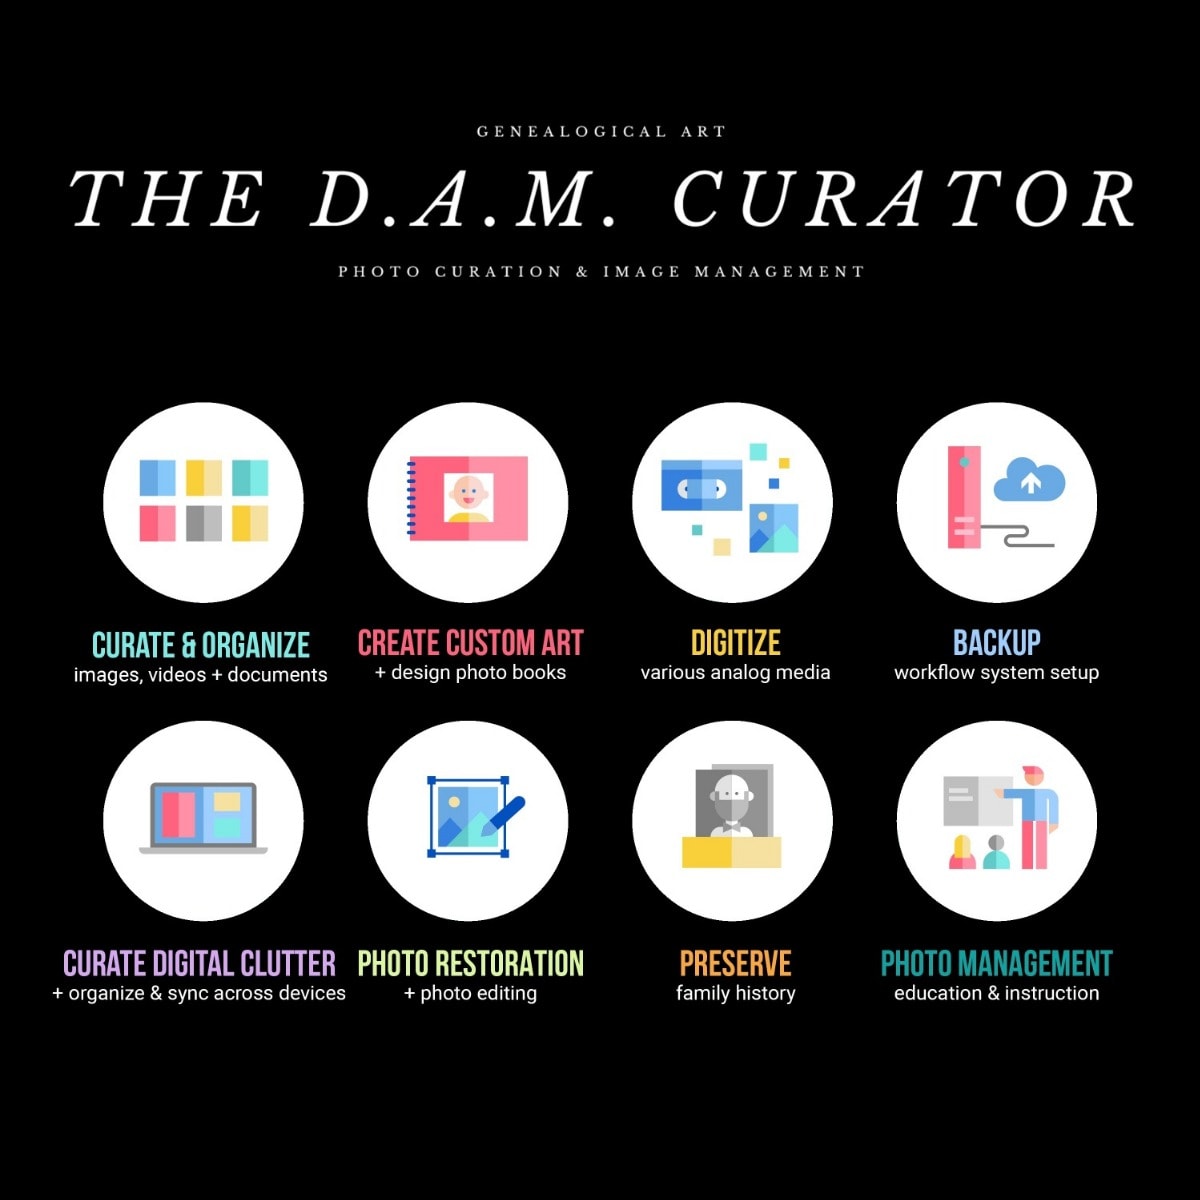 The D.A.M. Curator